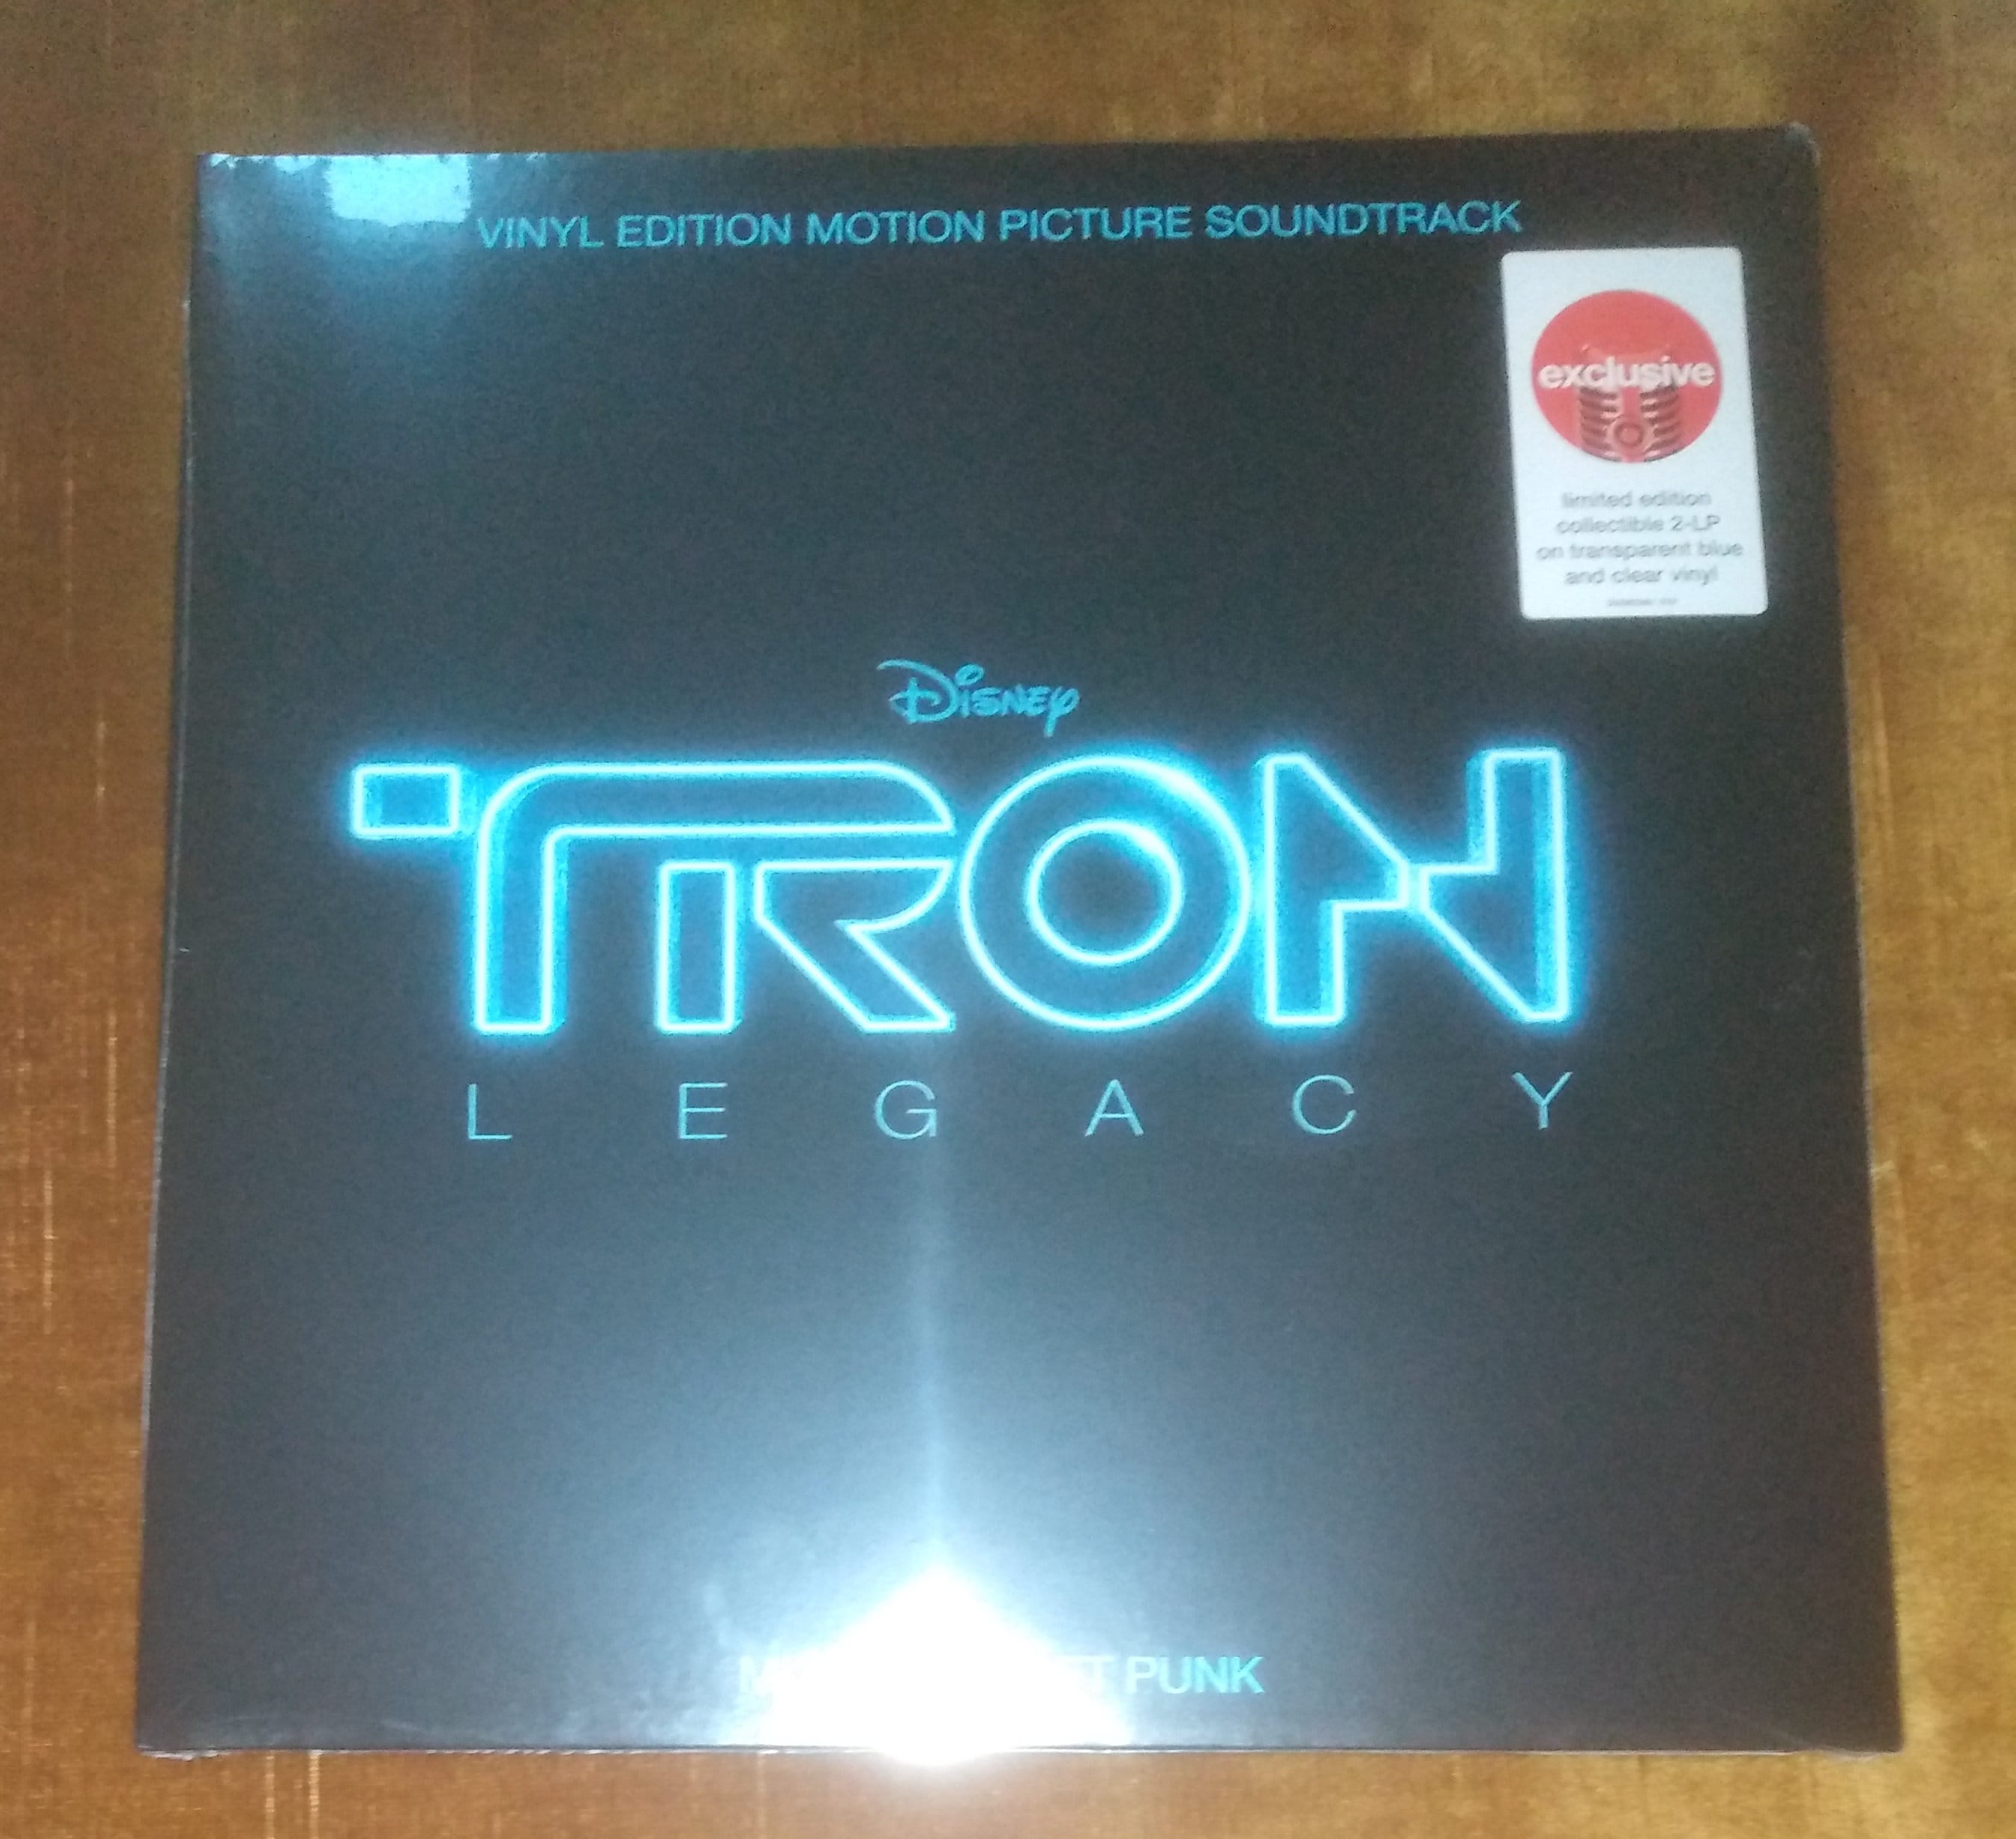 Daft Punk TRON Legacy vinyl Edition Motion Picture Soundtrack 2 Color Blue  / Clear Translucent LP Limited Edition New Sealed -  Canada